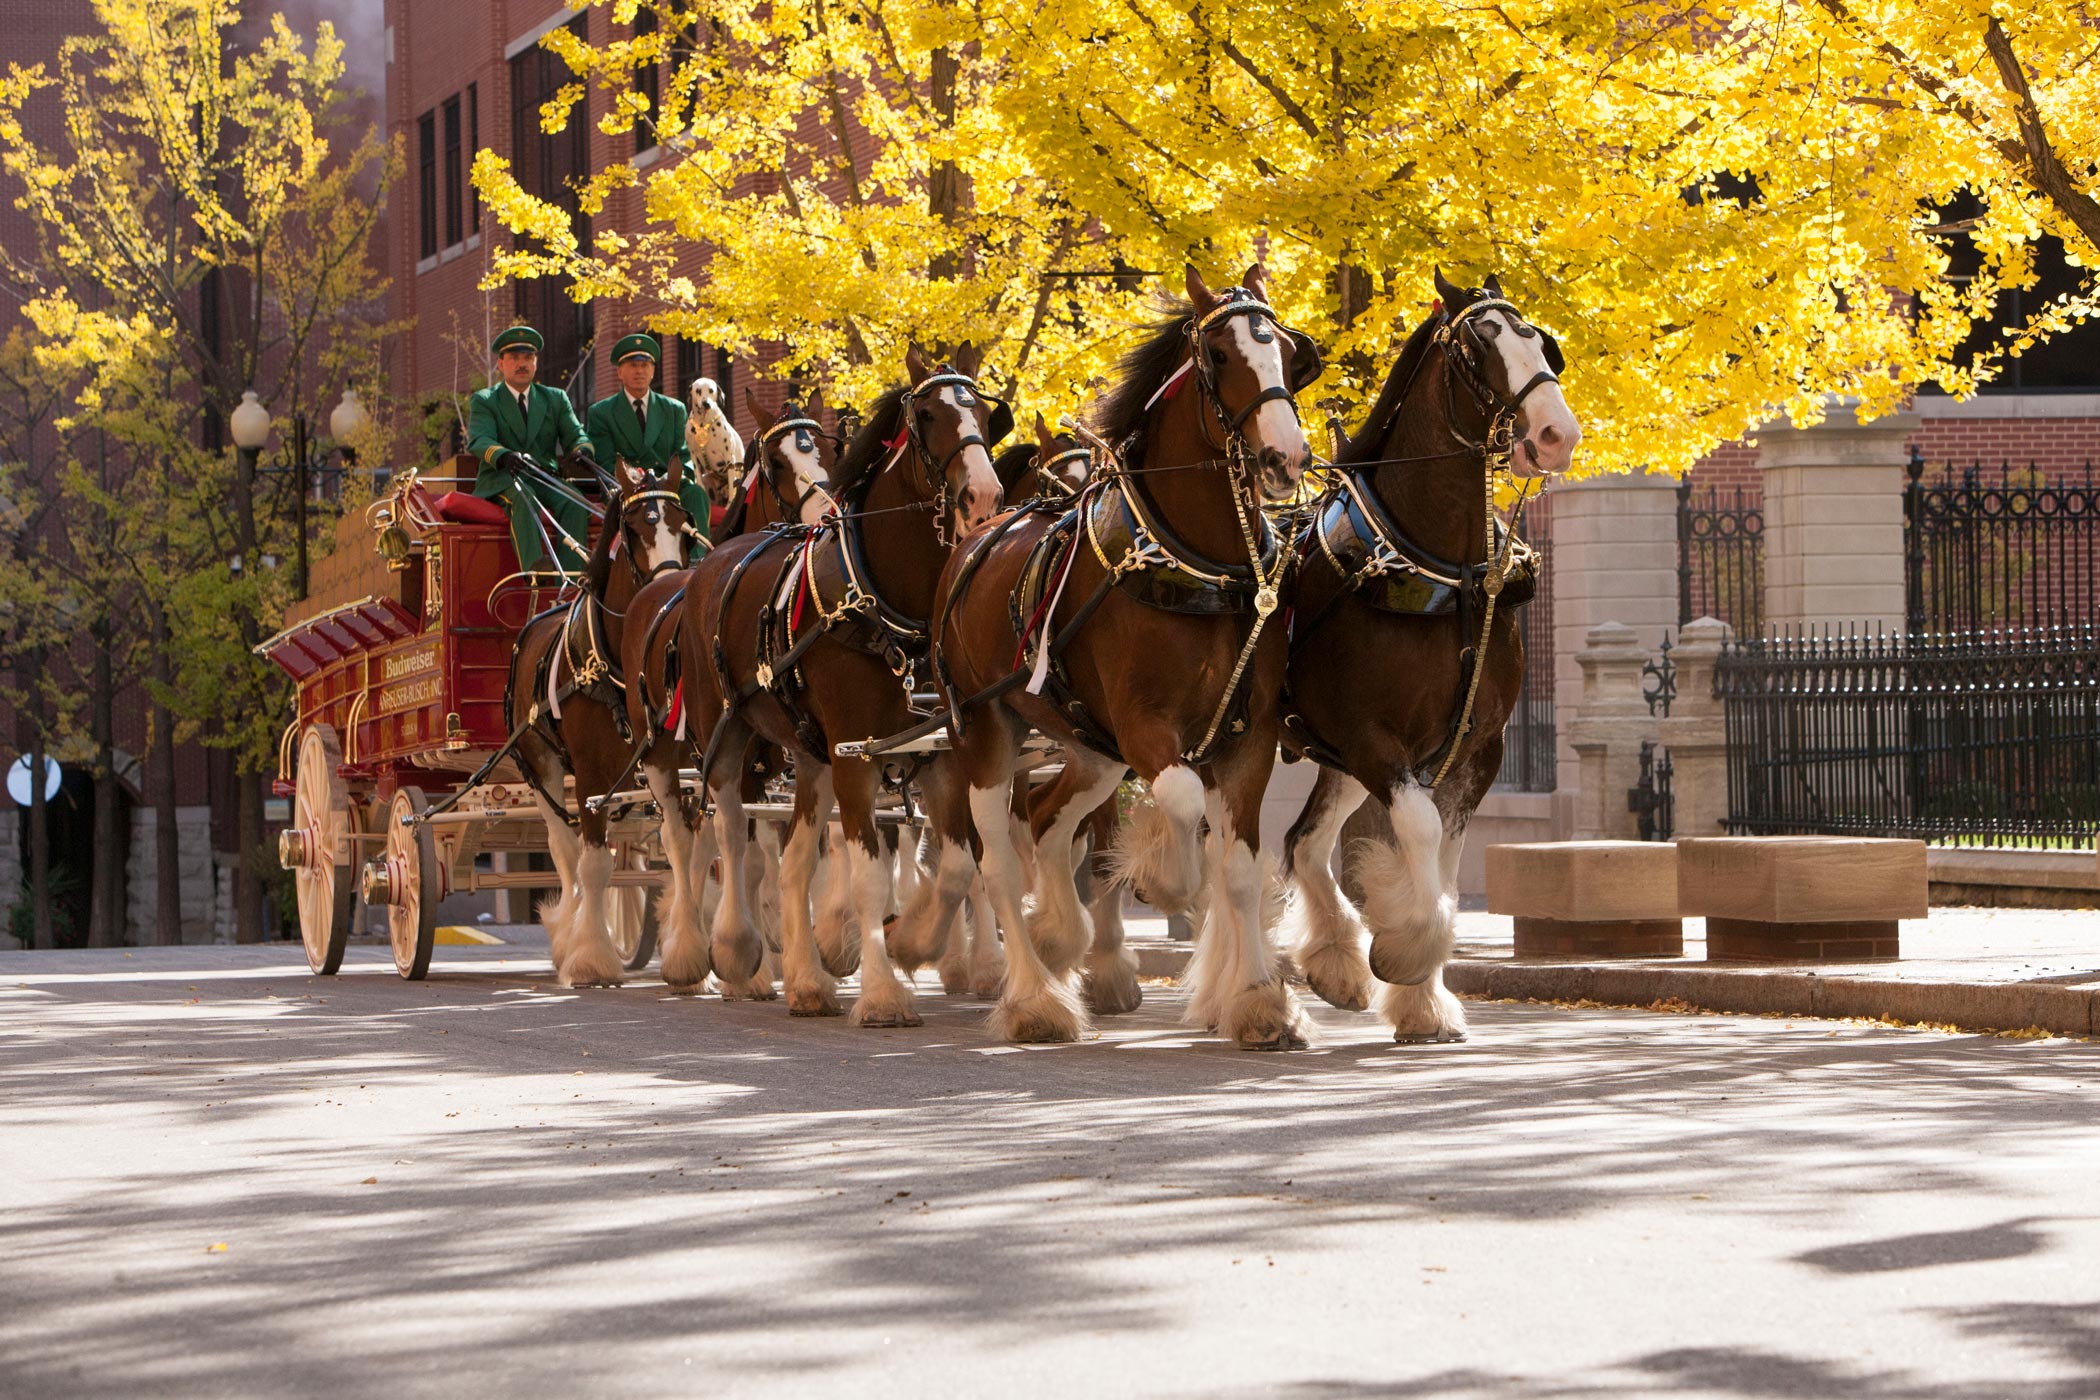 Budweiser Clydesdales At Harry Caray’s Tavern At Navy Pier